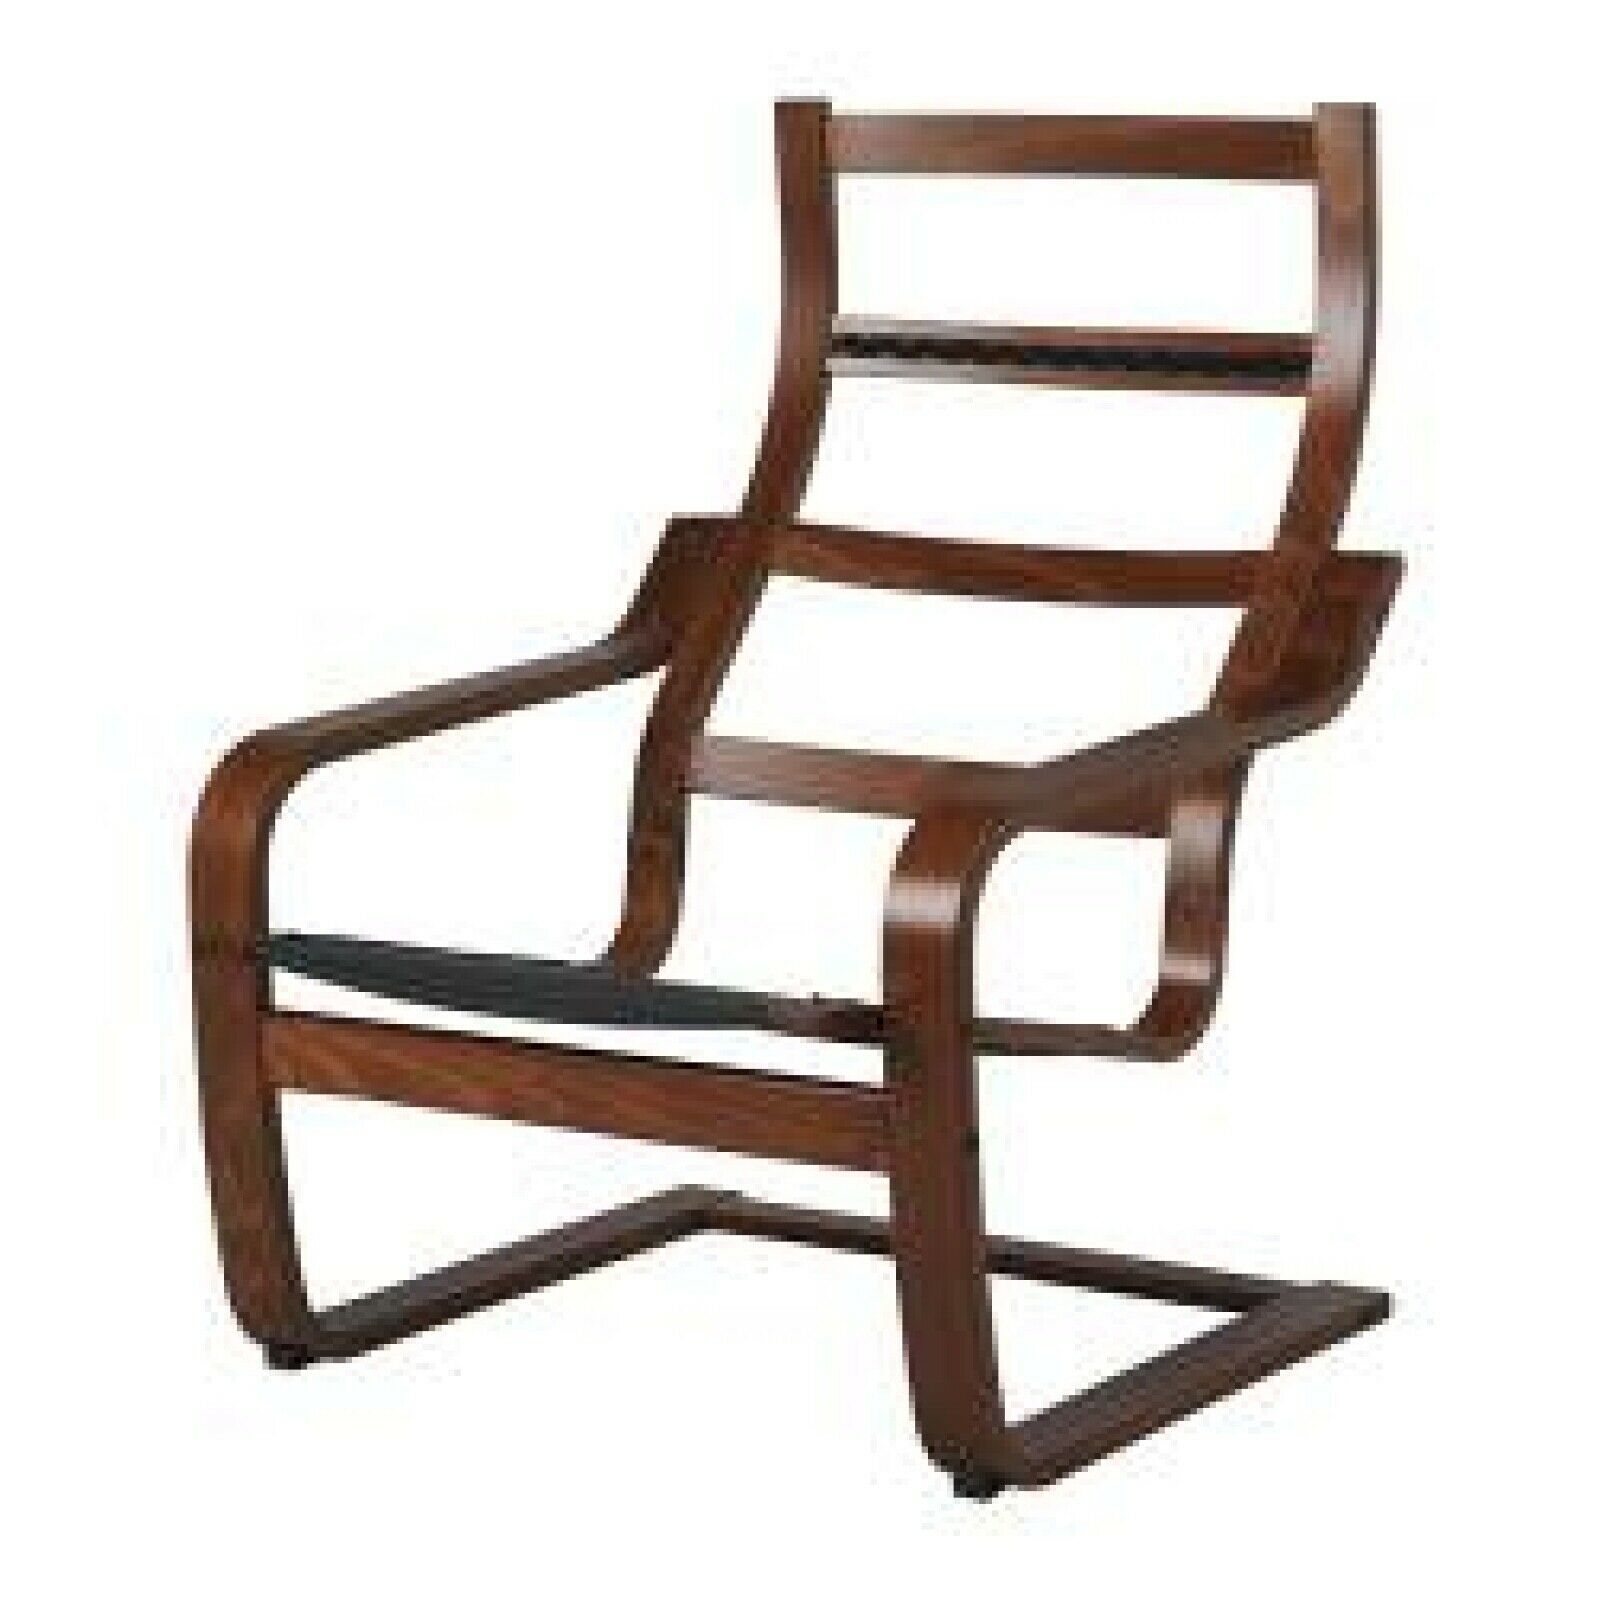 IKEA POANG Armchair Frame, Medium Brown, 400.239.43 - NEW IN BOX - Chairs